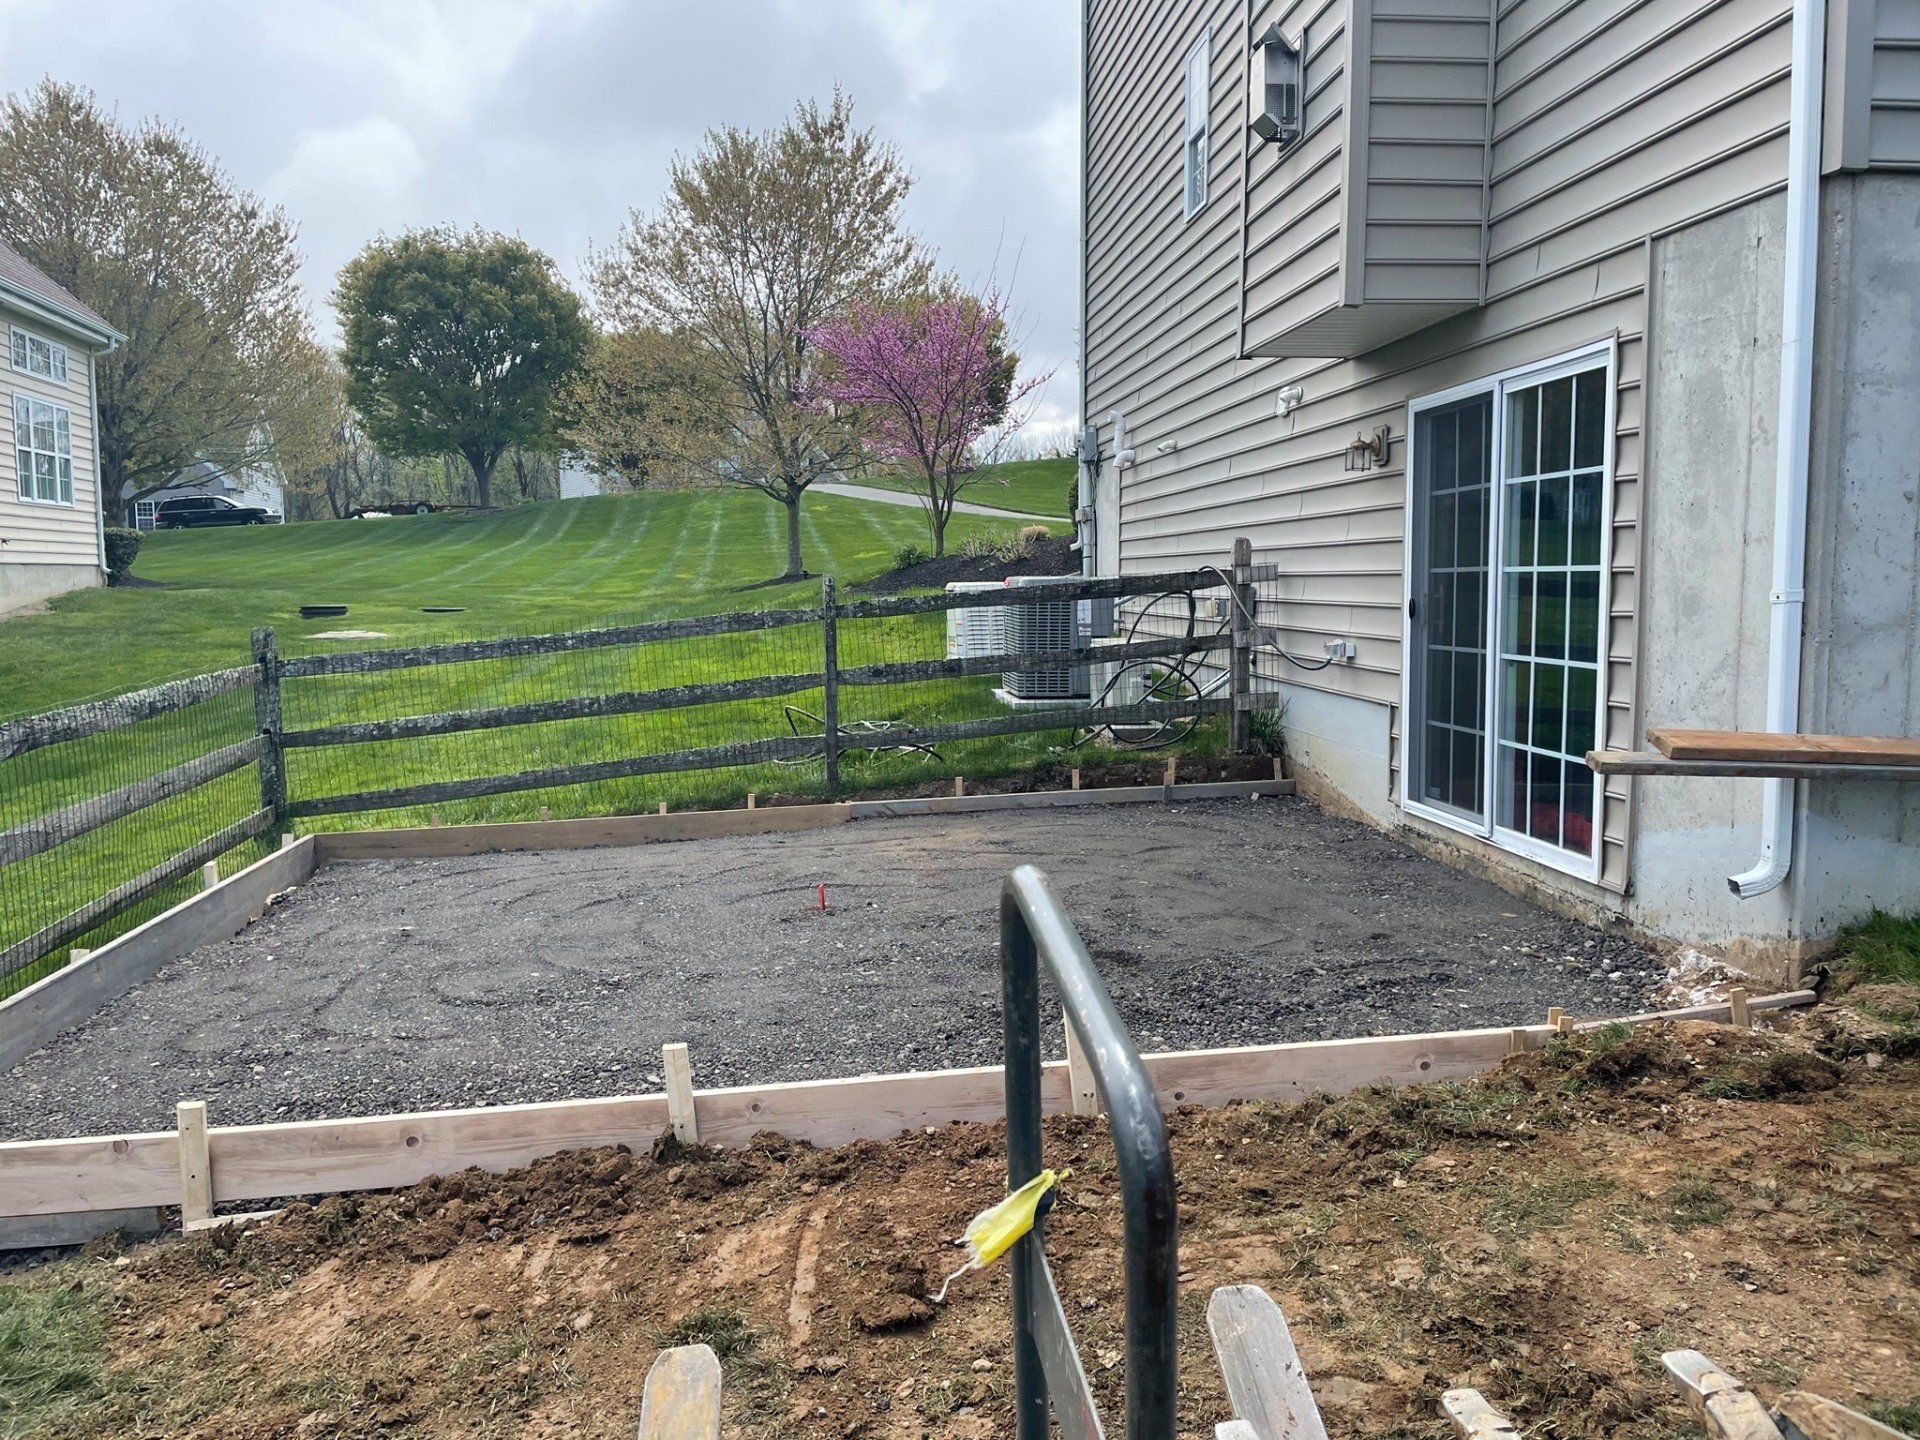 Concrete patio being prepared outside of patio doors in the backyard of a house.